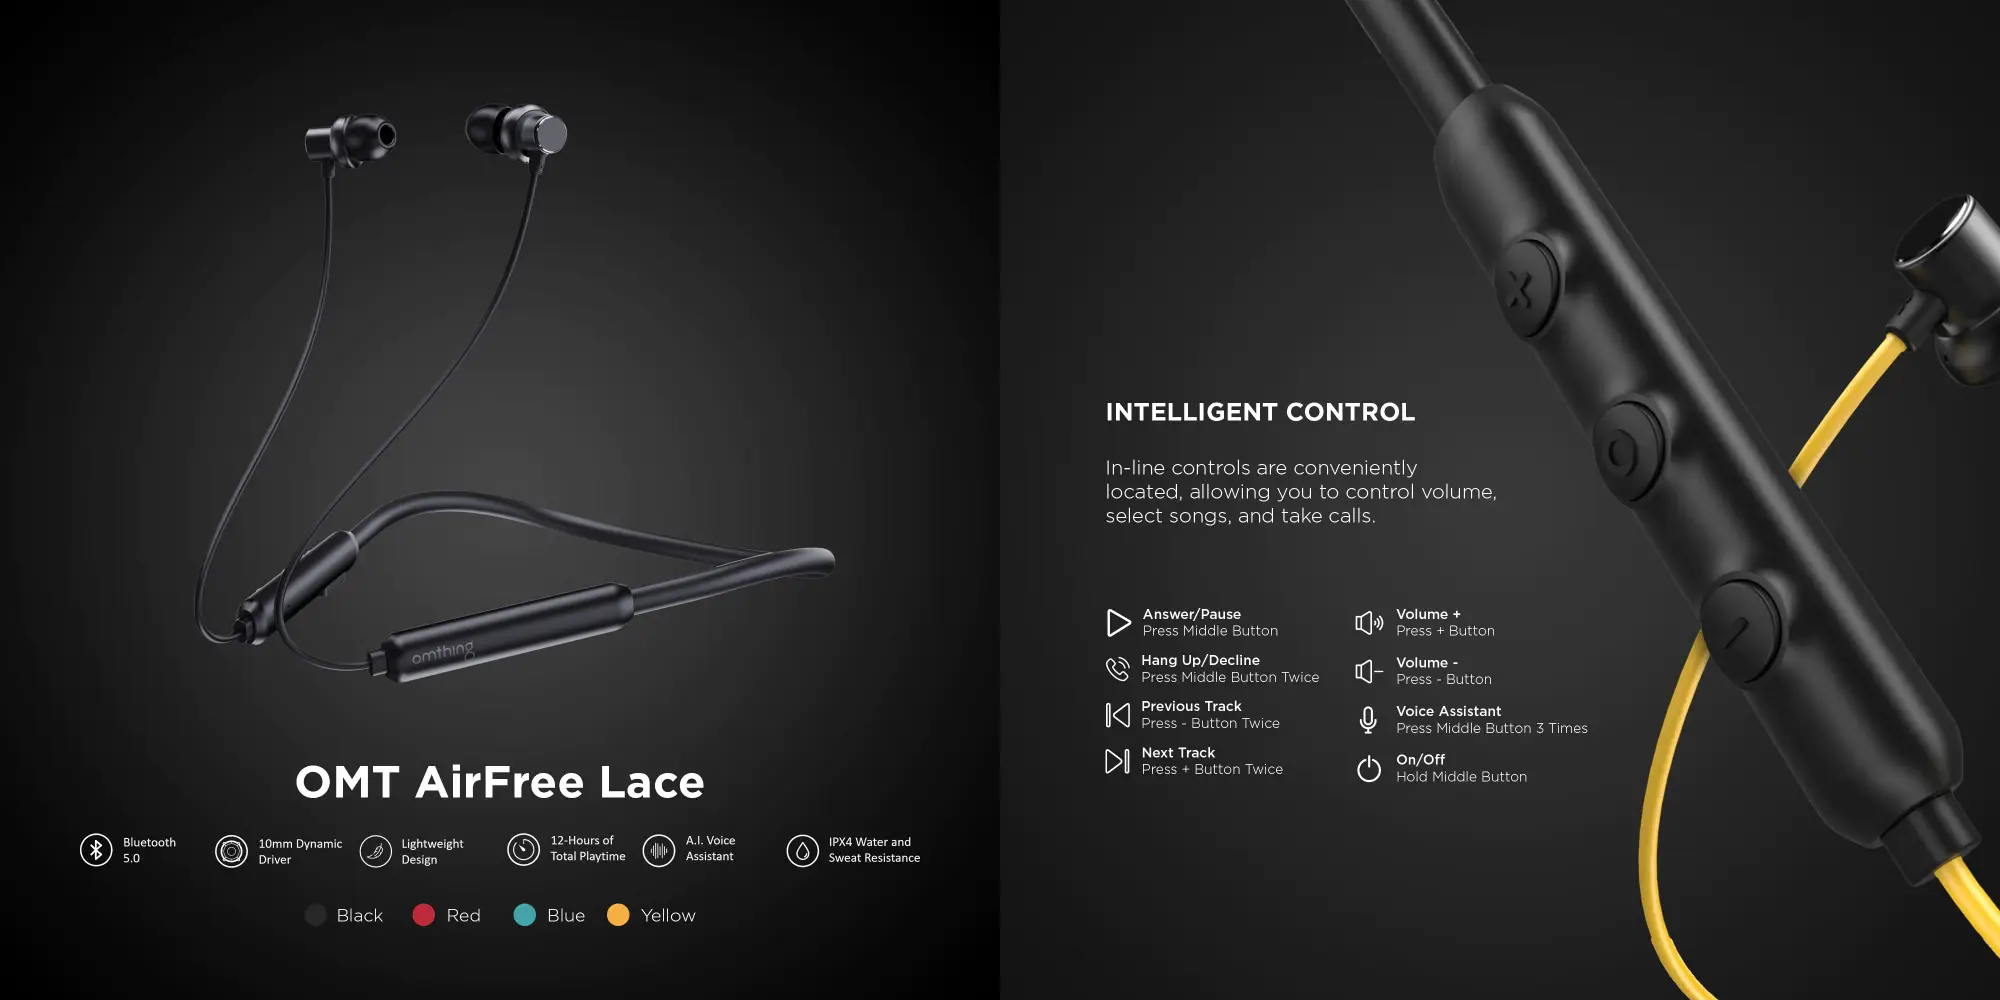 1More Omthing Airfree Lace Neckband Wireless Headphones